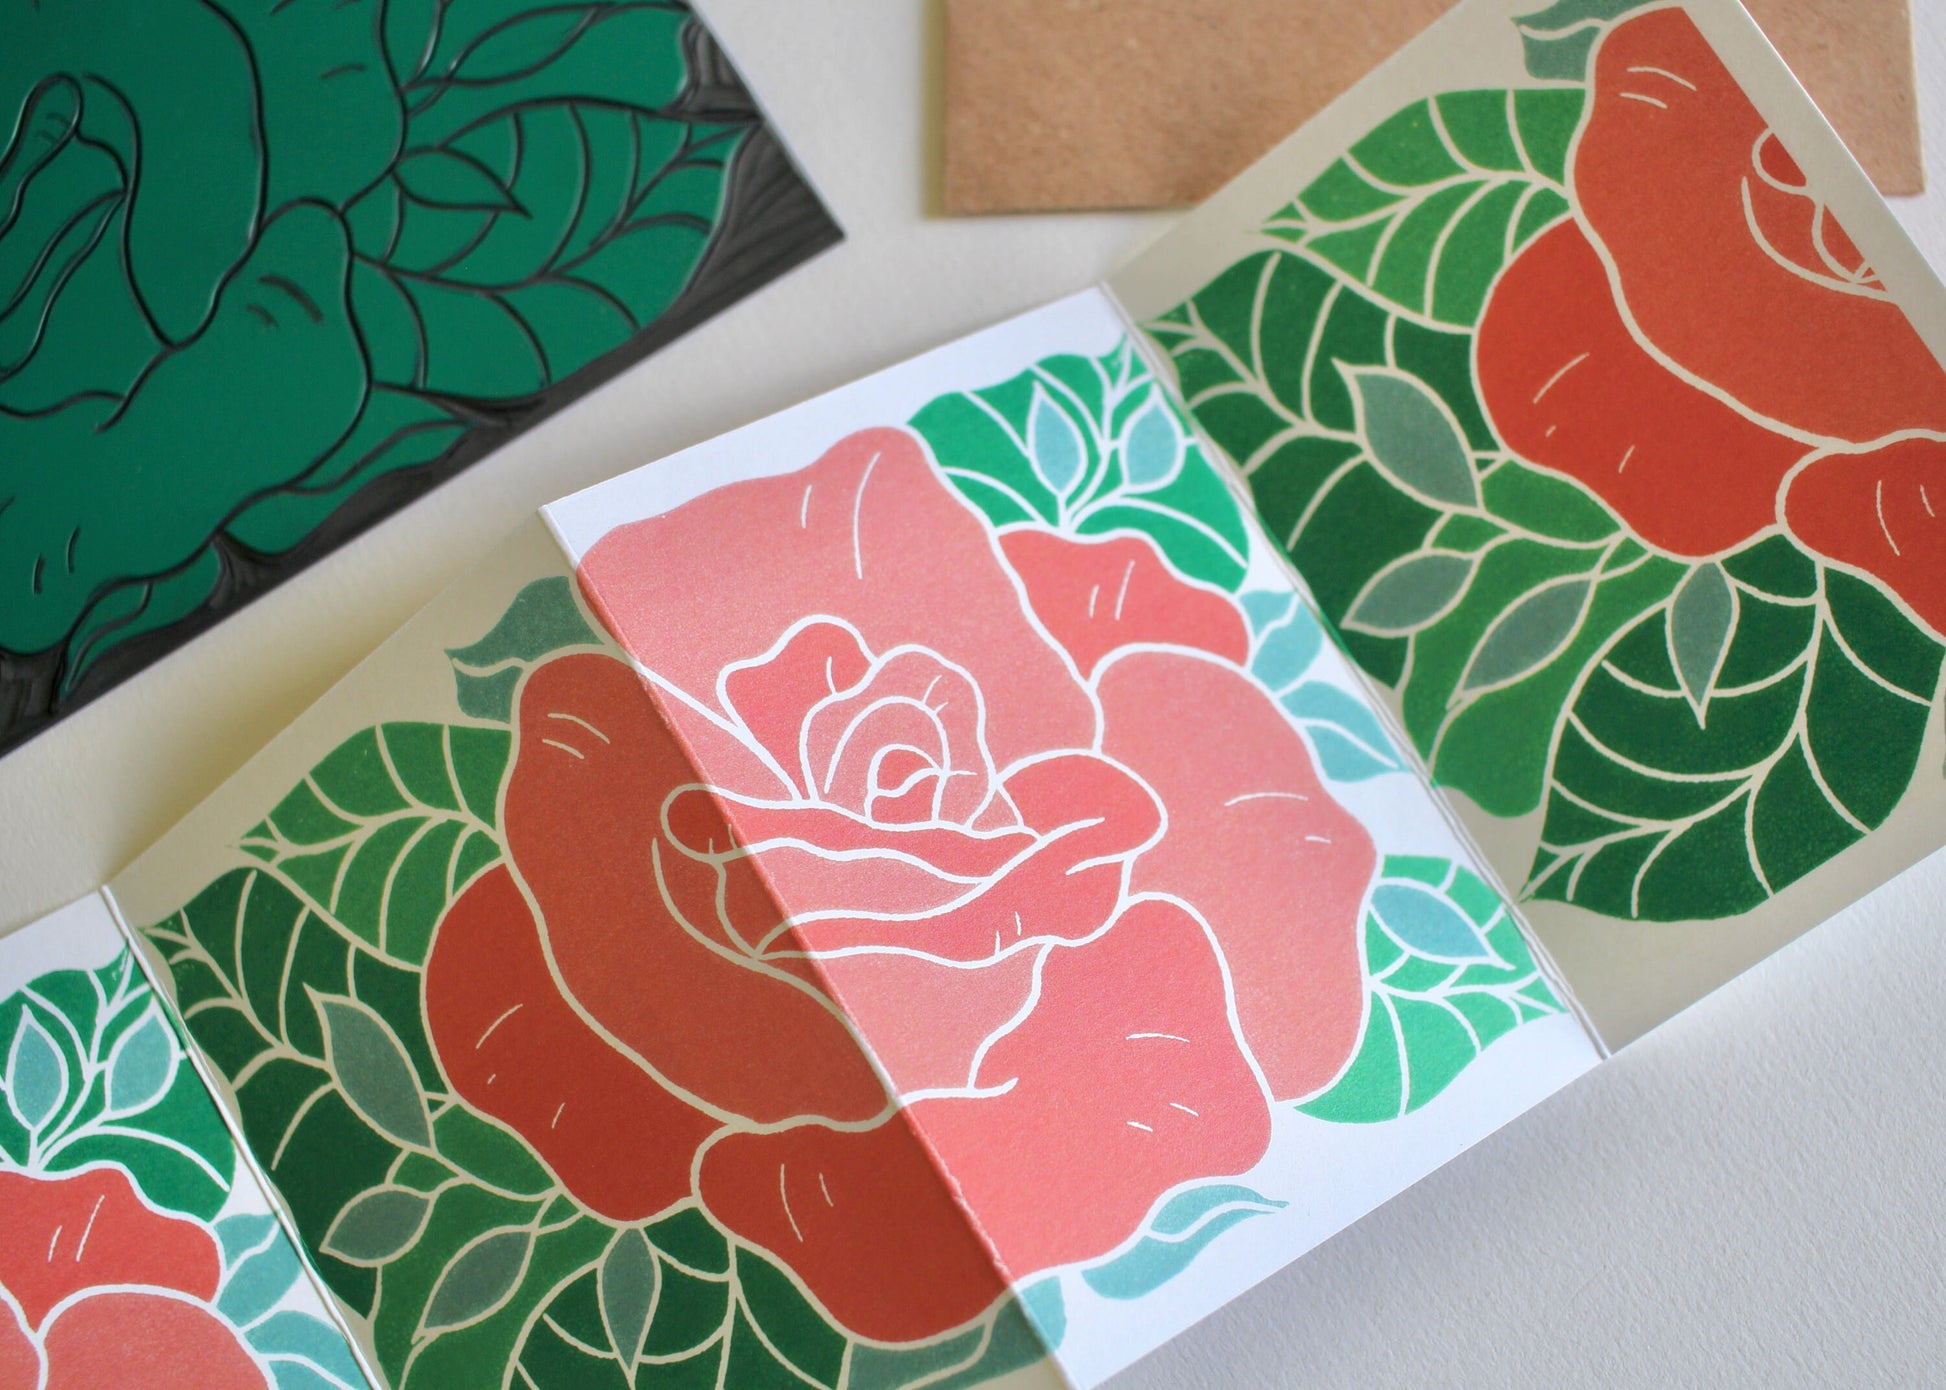 A folded concertina art card featuring a linocut rose and leaves artwork printed on both sides